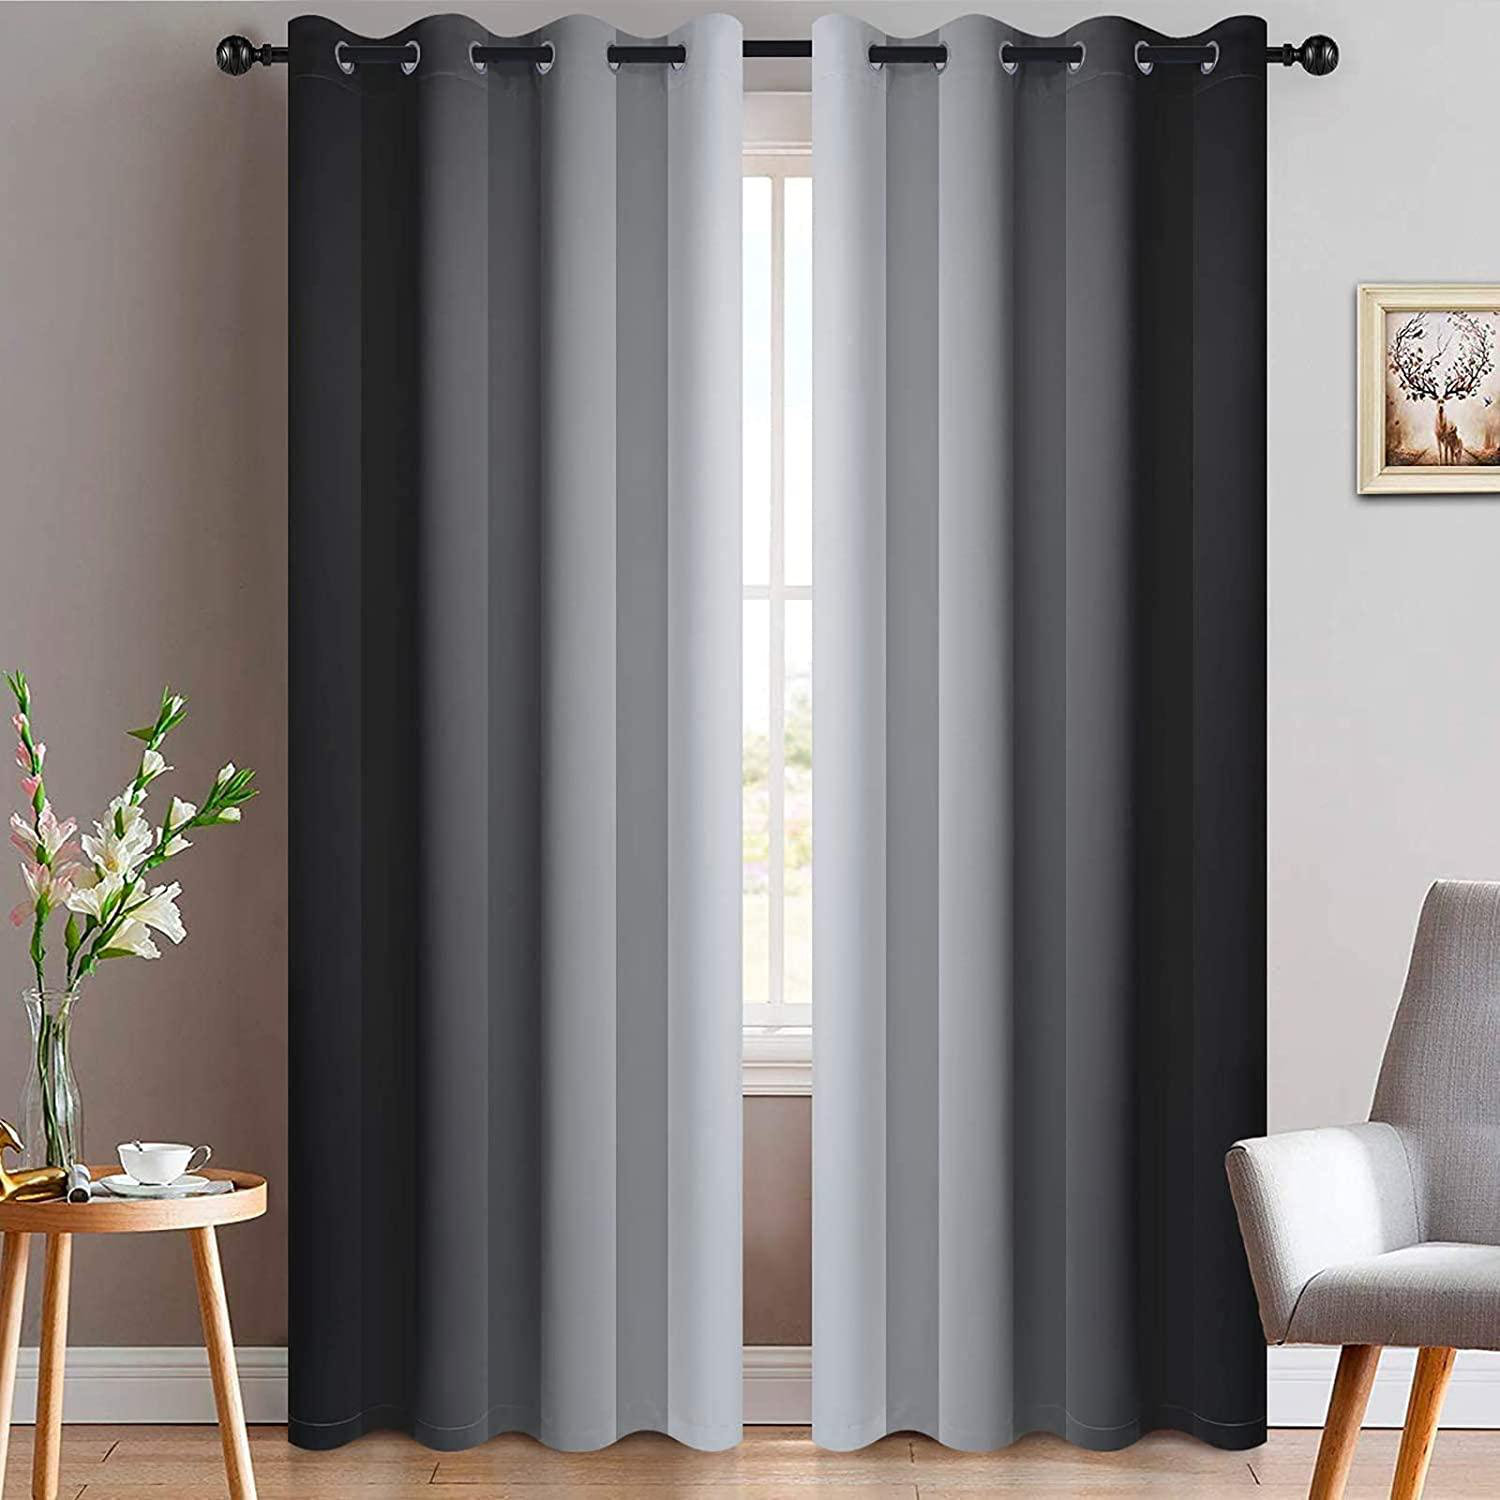 Thermal Insulated Blackout Grommet Curtain Drapes for Living Room-52 inch Width